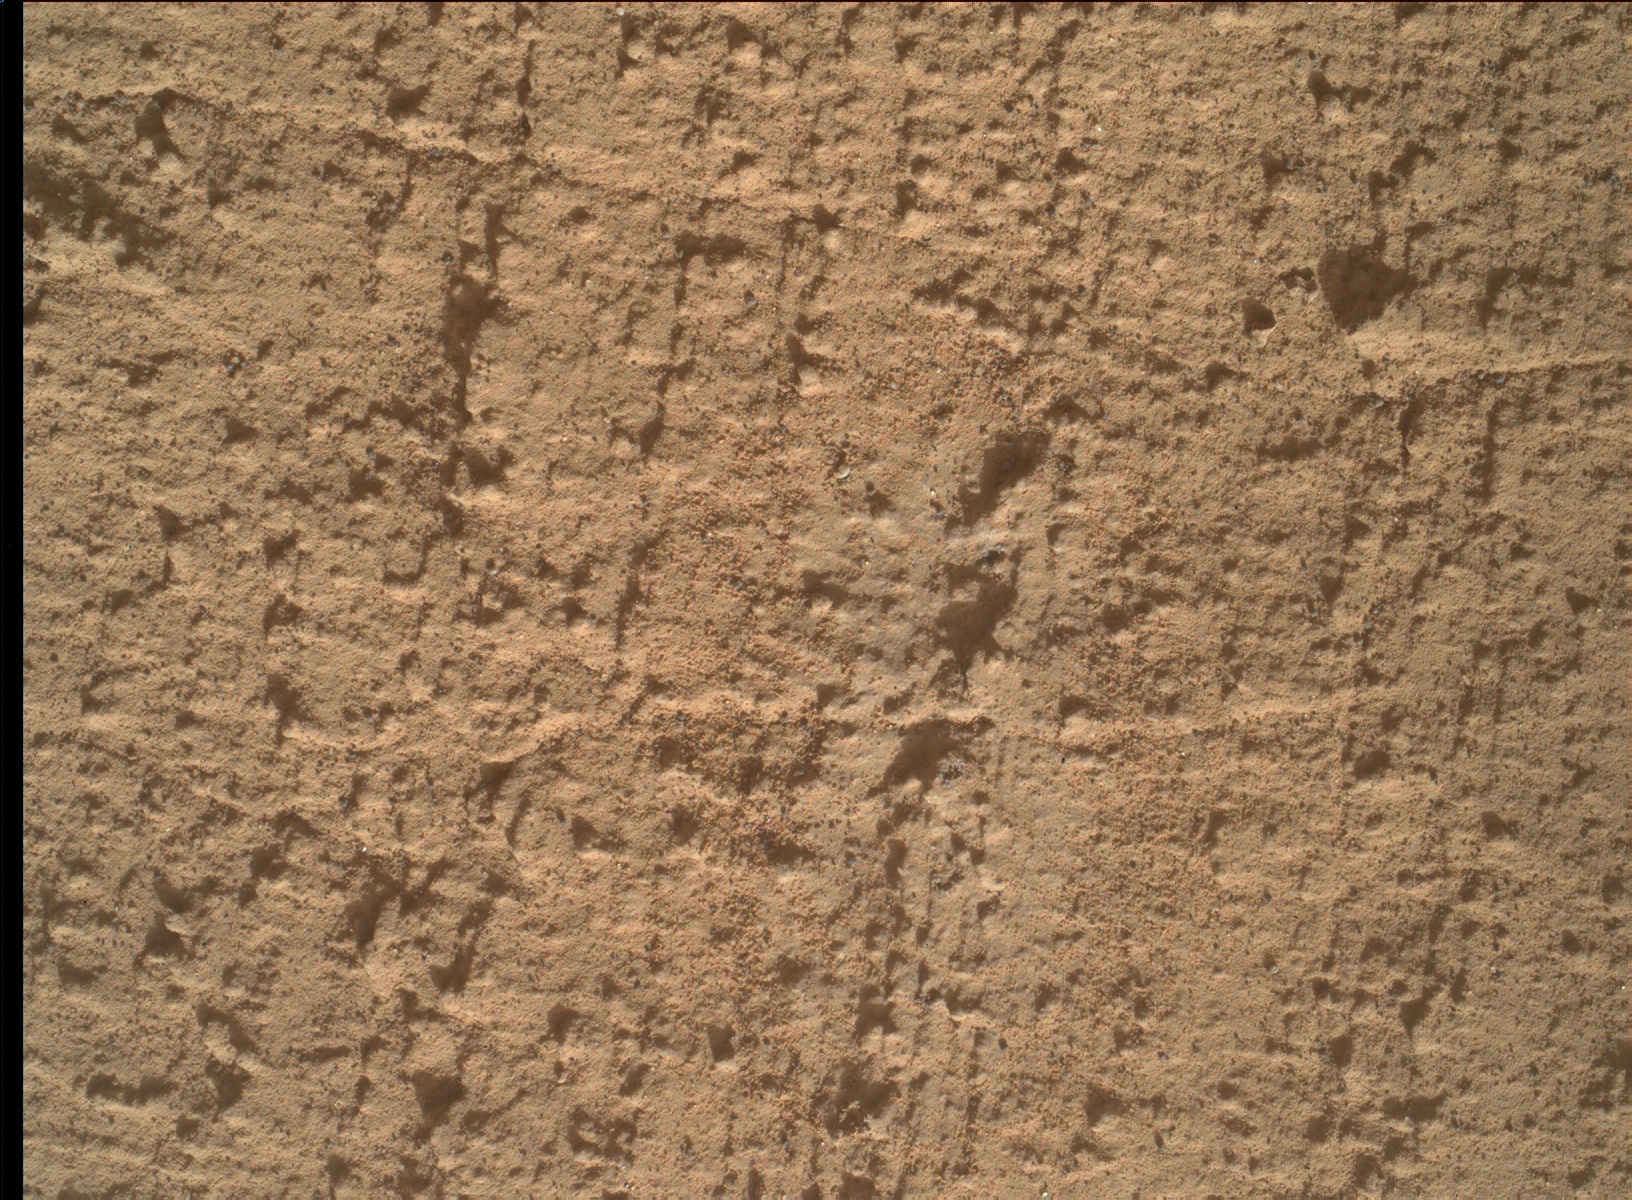 Nasa's Mars rover Curiosity acquired this image using its Mars Hand Lens Imager (MAHLI) on Sol 3596